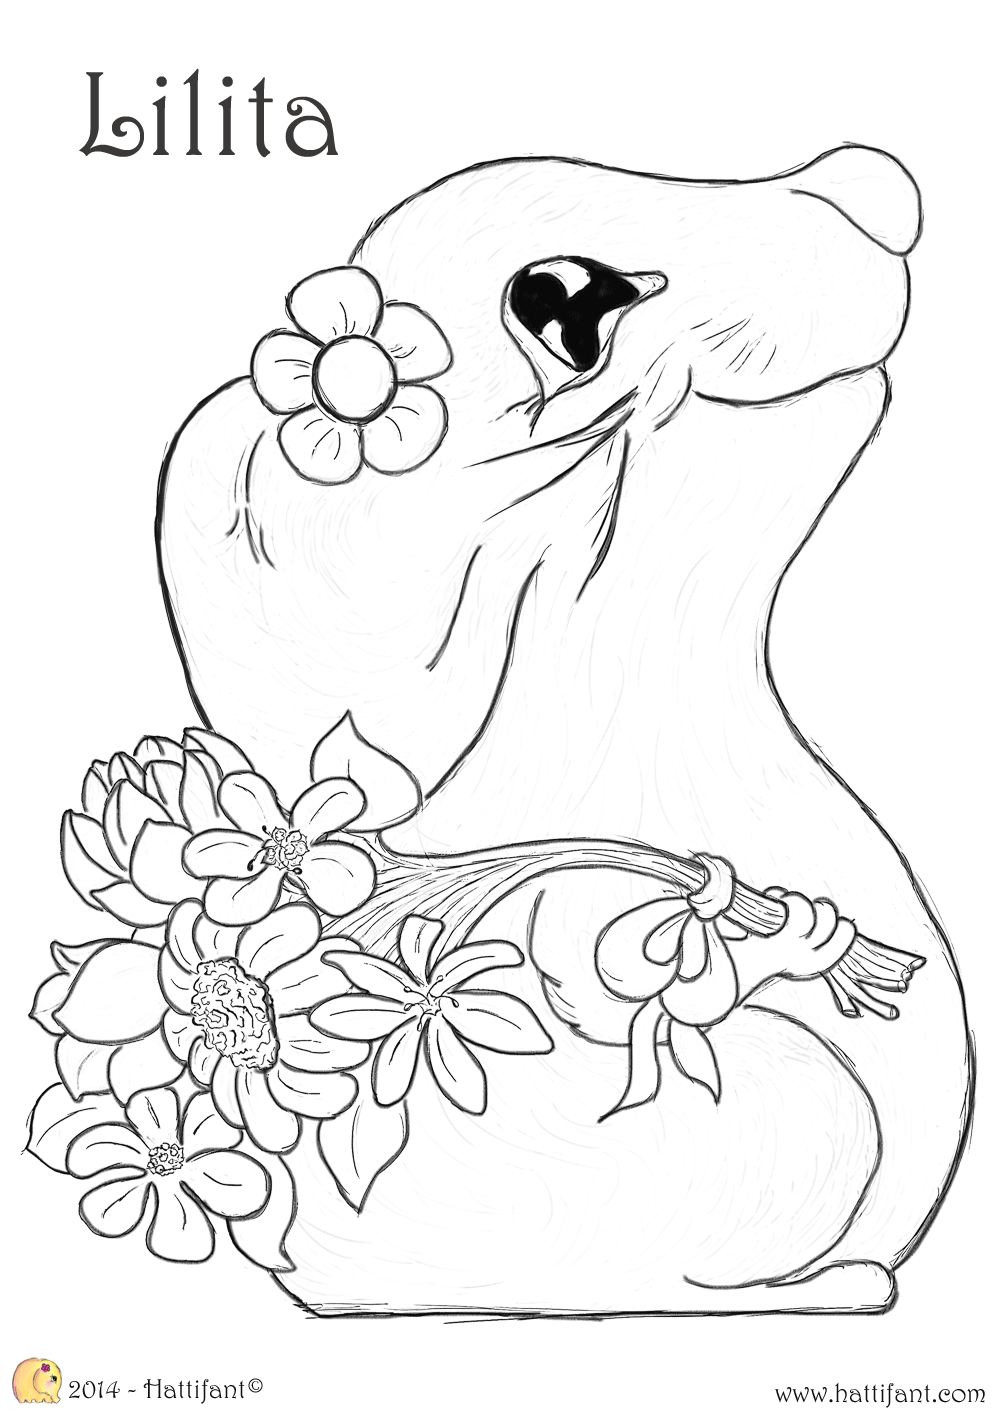 Click here to download full size version of Lilita to colour in!